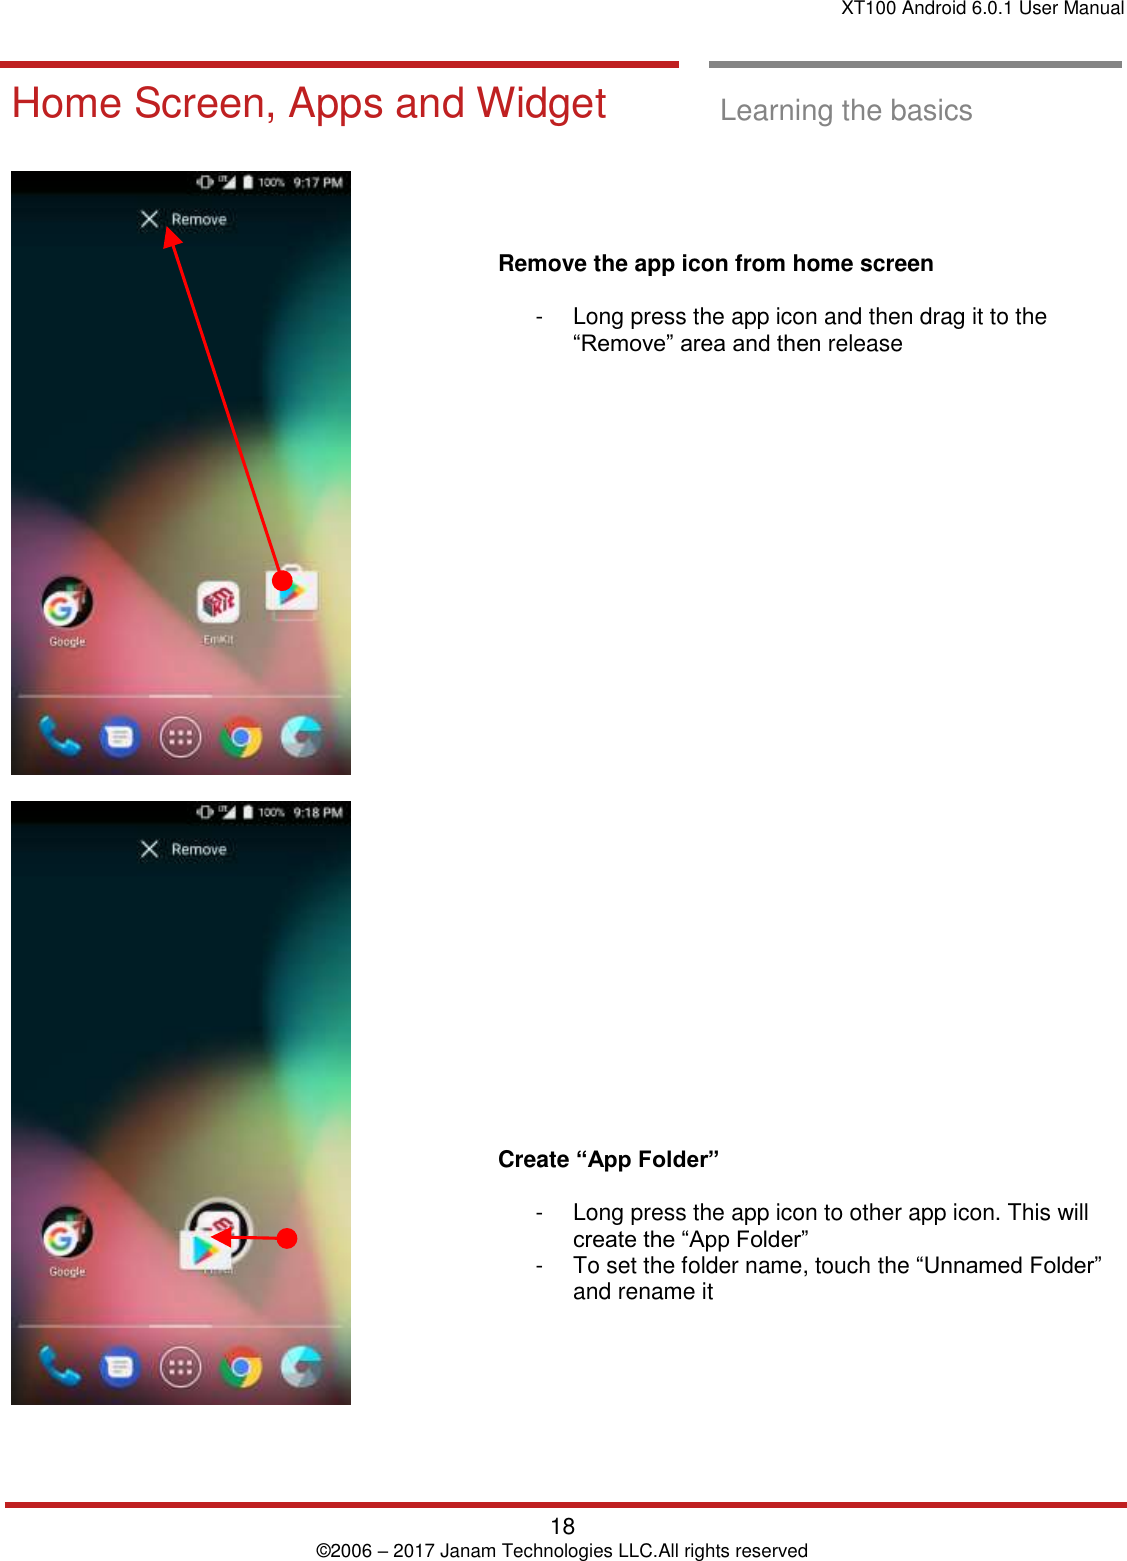 XT100 Android 6.0.1 User Manual   18 © 2006 – 2017 Janam Technologies LLC.All rights reserved  Learning the basics  Home Screen, Apps and Widget  Learning the basics          Remove the app icon from home screen  -  Long press the app icon and then drag it to the “Remove” area and then release                                 Create “App Folder”  -  Long press the app icon to other app icon. This will create the “App Folder”  -  To set the folder name, touch the “Unnamed Folder” and rename it 